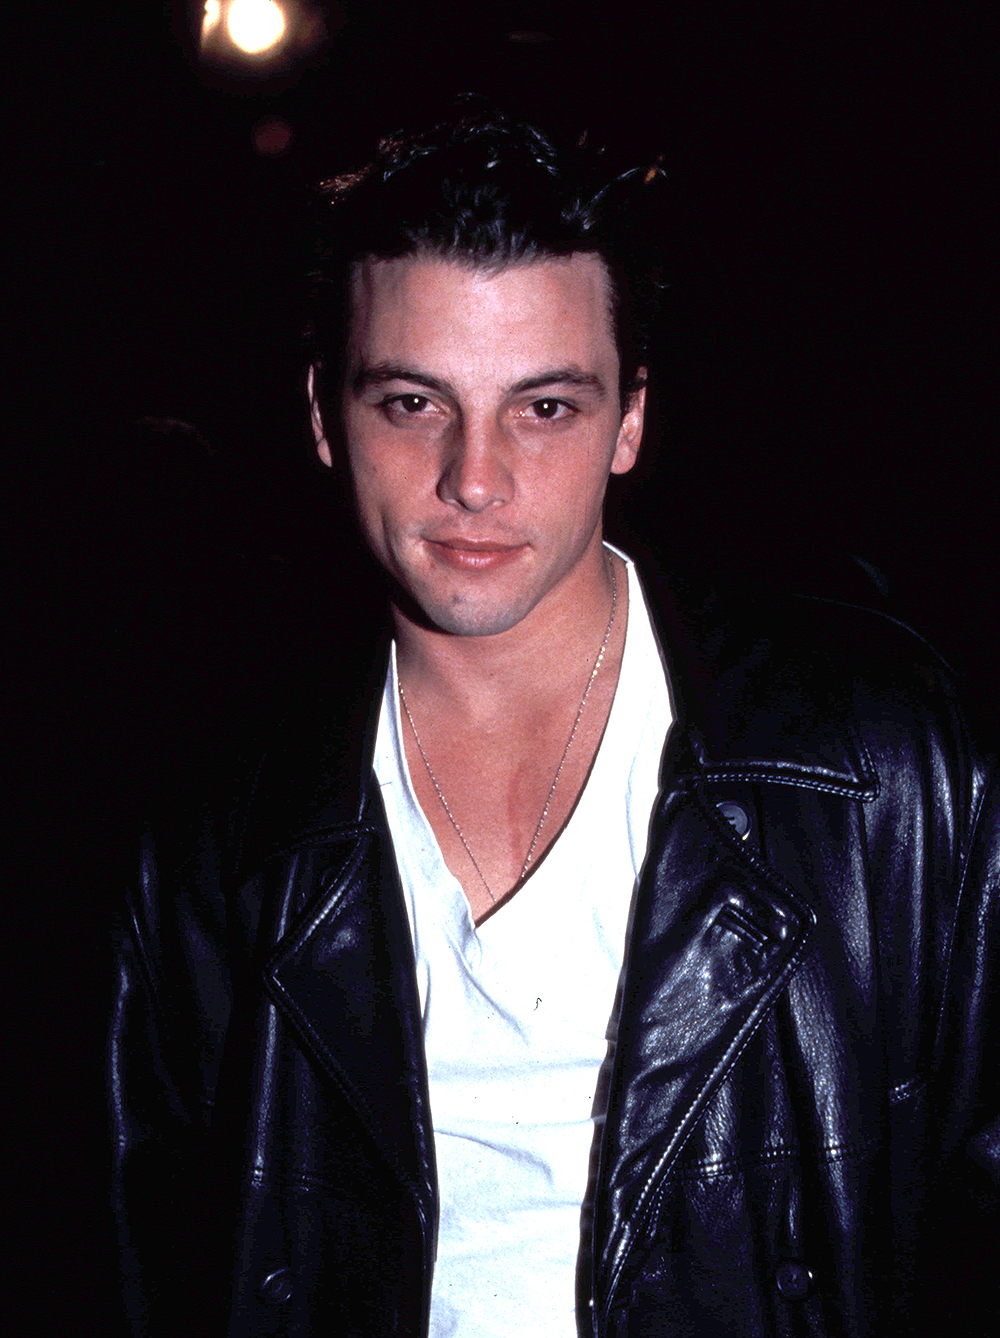 <p>Skeet Ulrich gave cameras a smoldering stare during the premiere of his movie <em>Mixed Nuts </em>on December 8, 1994, in Los Angeles. He looked cool with spiked hair and a leather motorcycle jacket.</p>